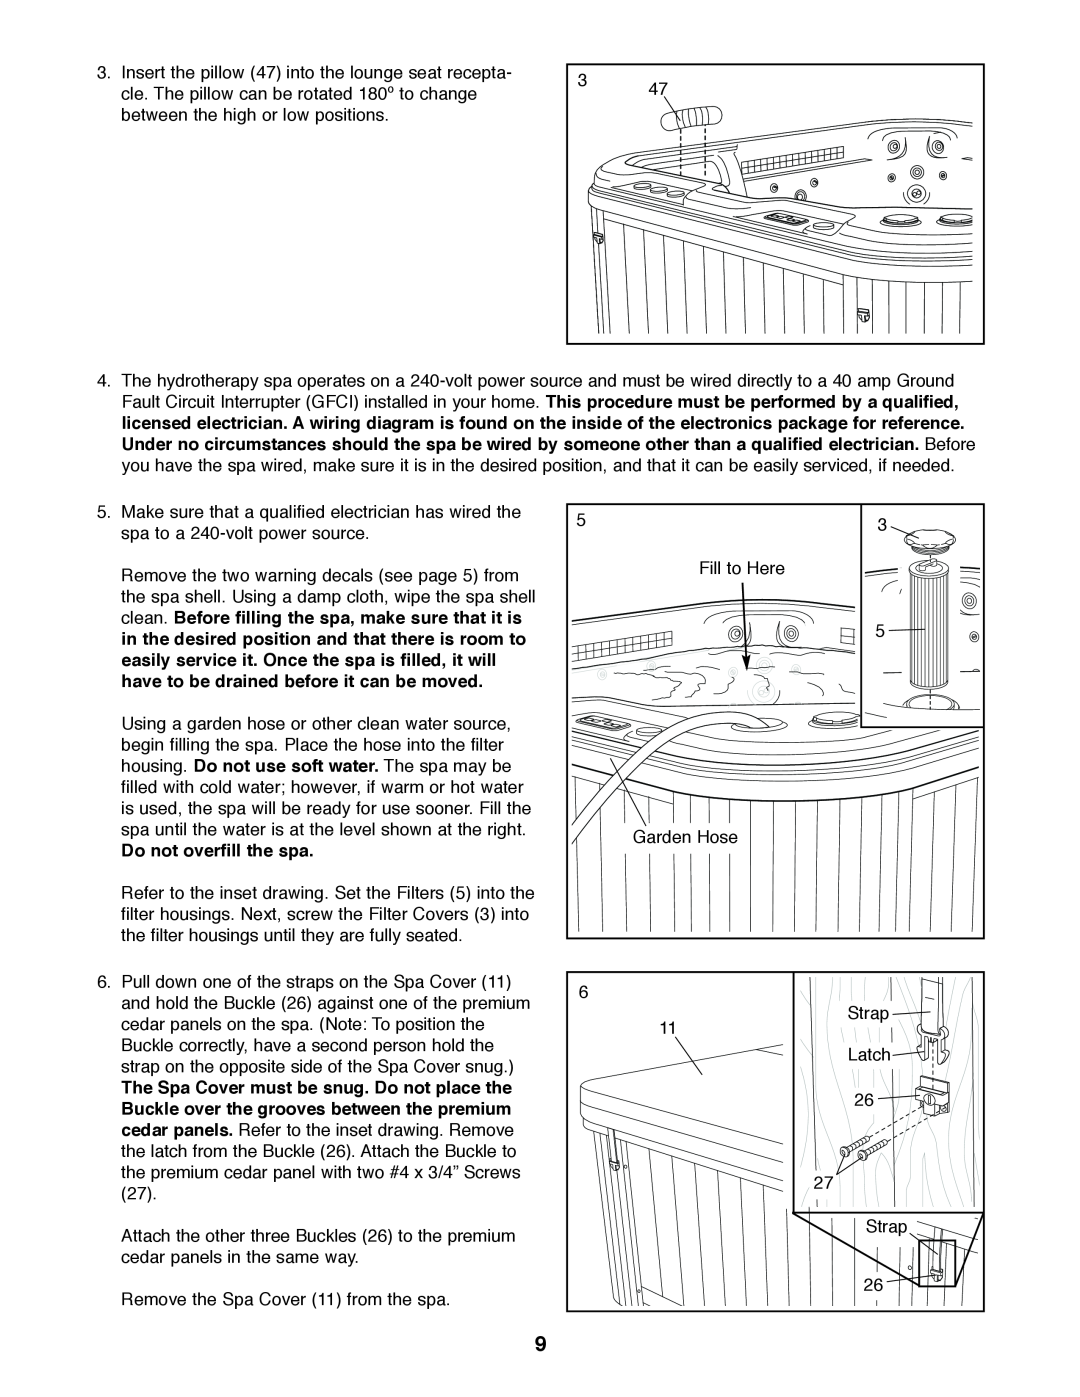 Image IMSW73910 user manual in the desired position and that there is room to, have to be drained before it can be moved 